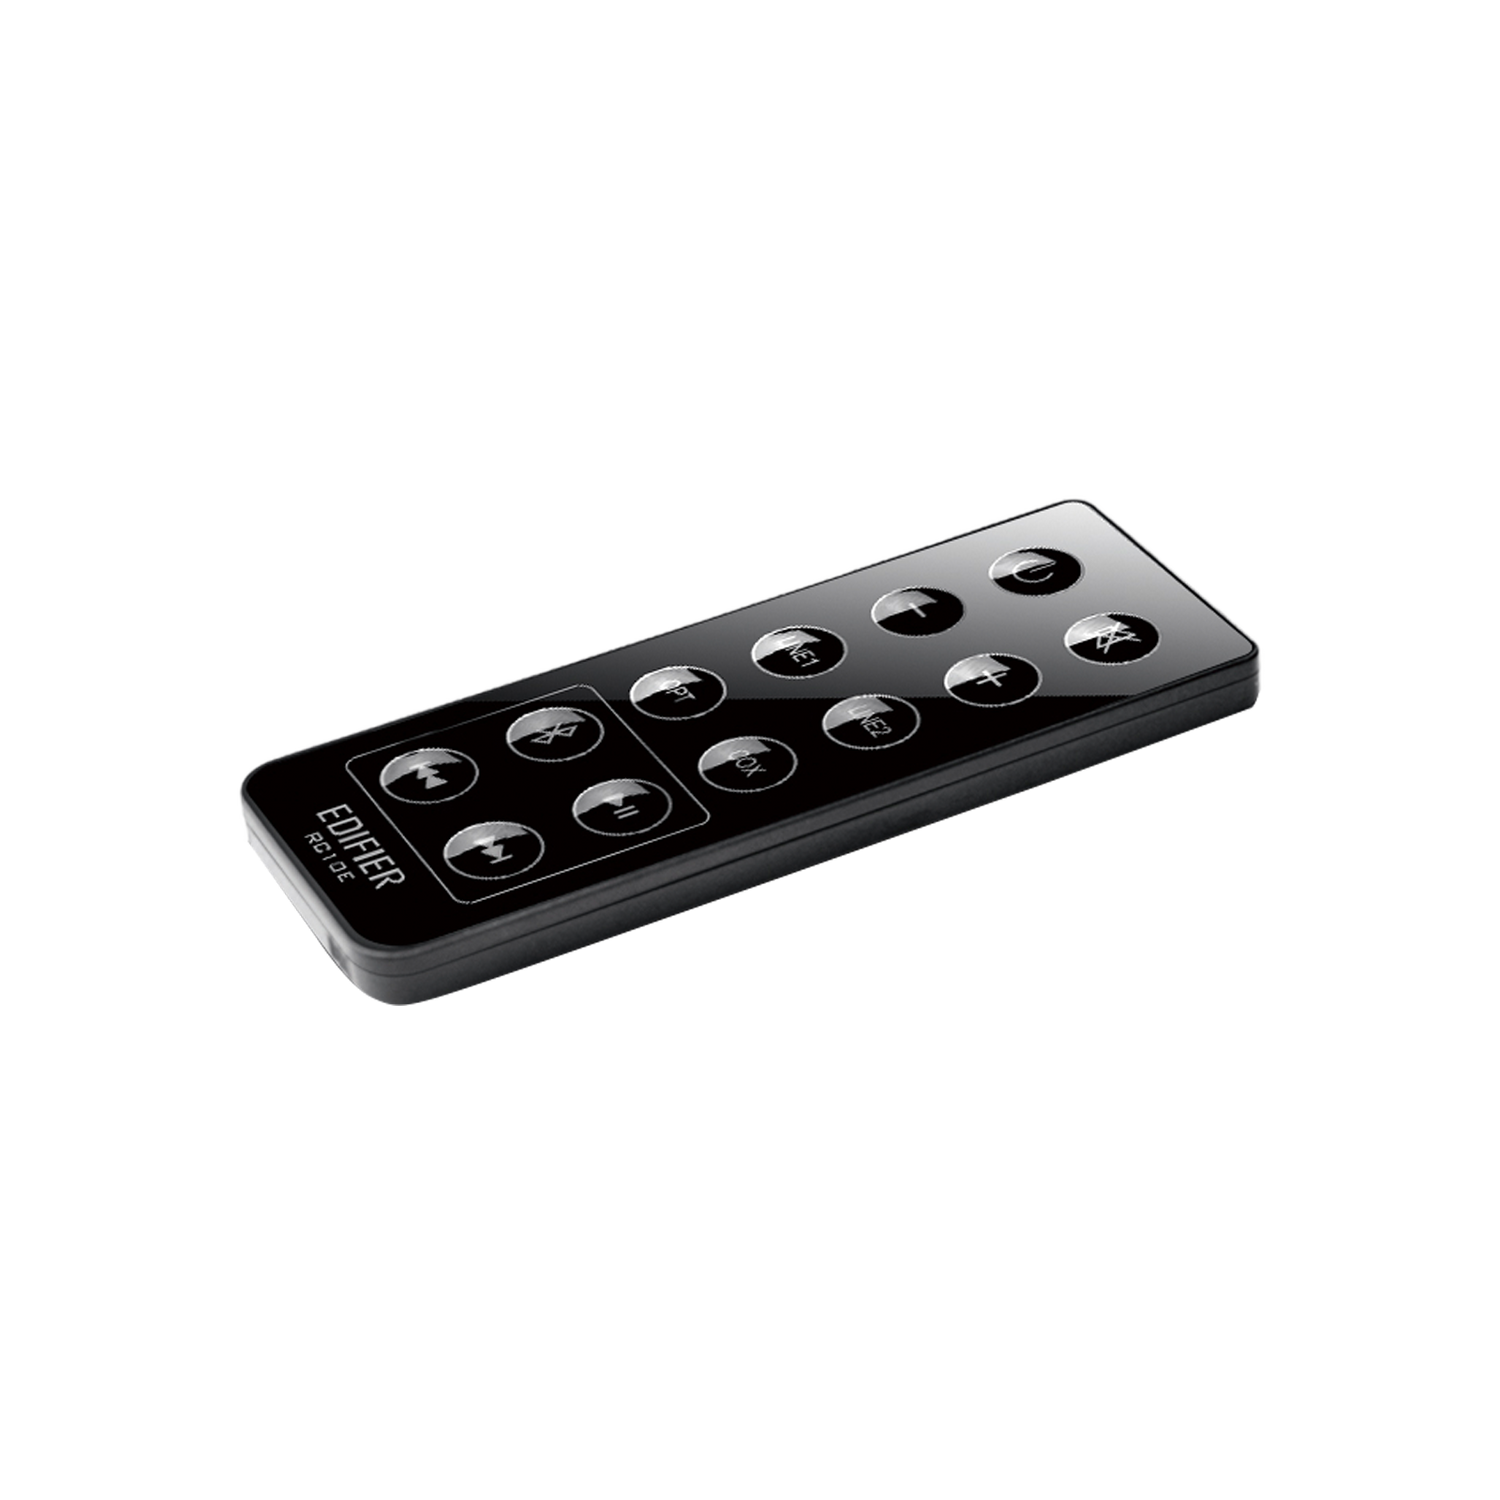 Remote - R1280DB Fully functional wireless remote for the R1280DB Speakers